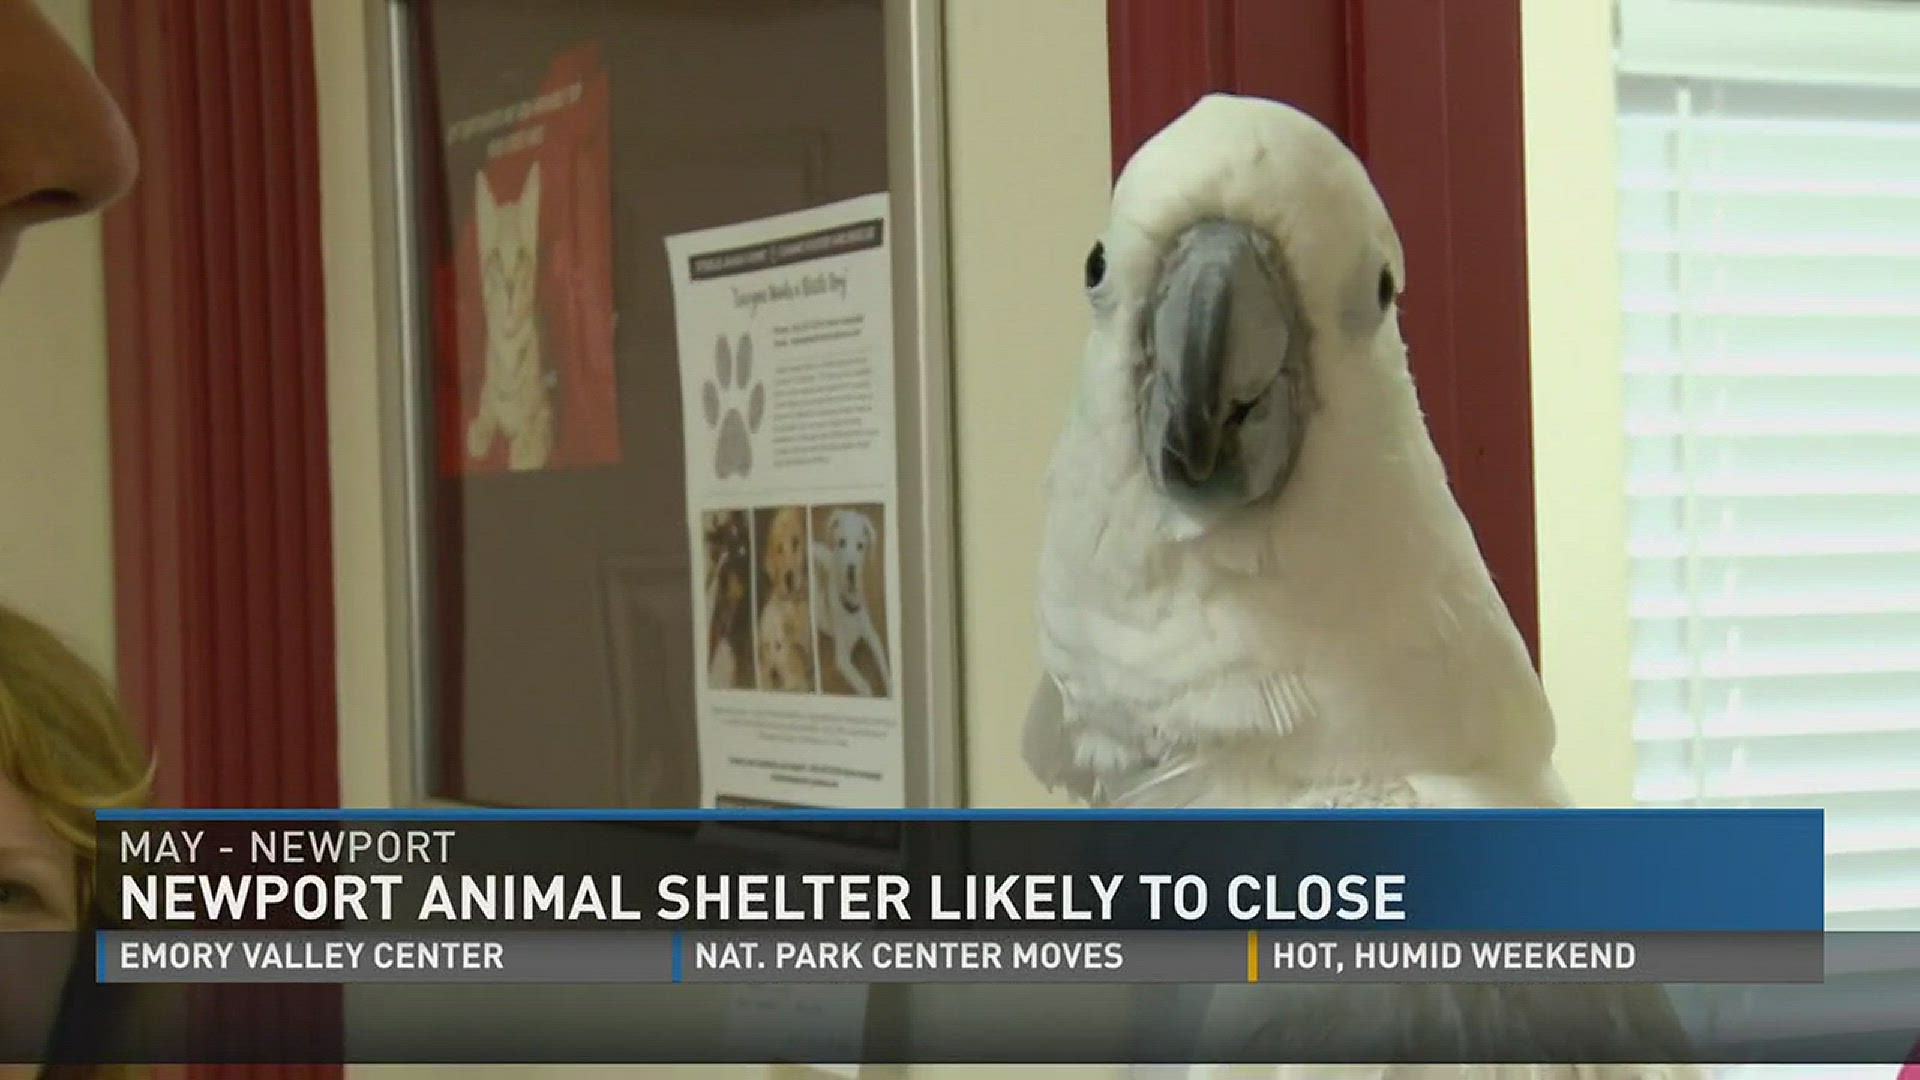 The Newport animal shelter will likely close in early July.